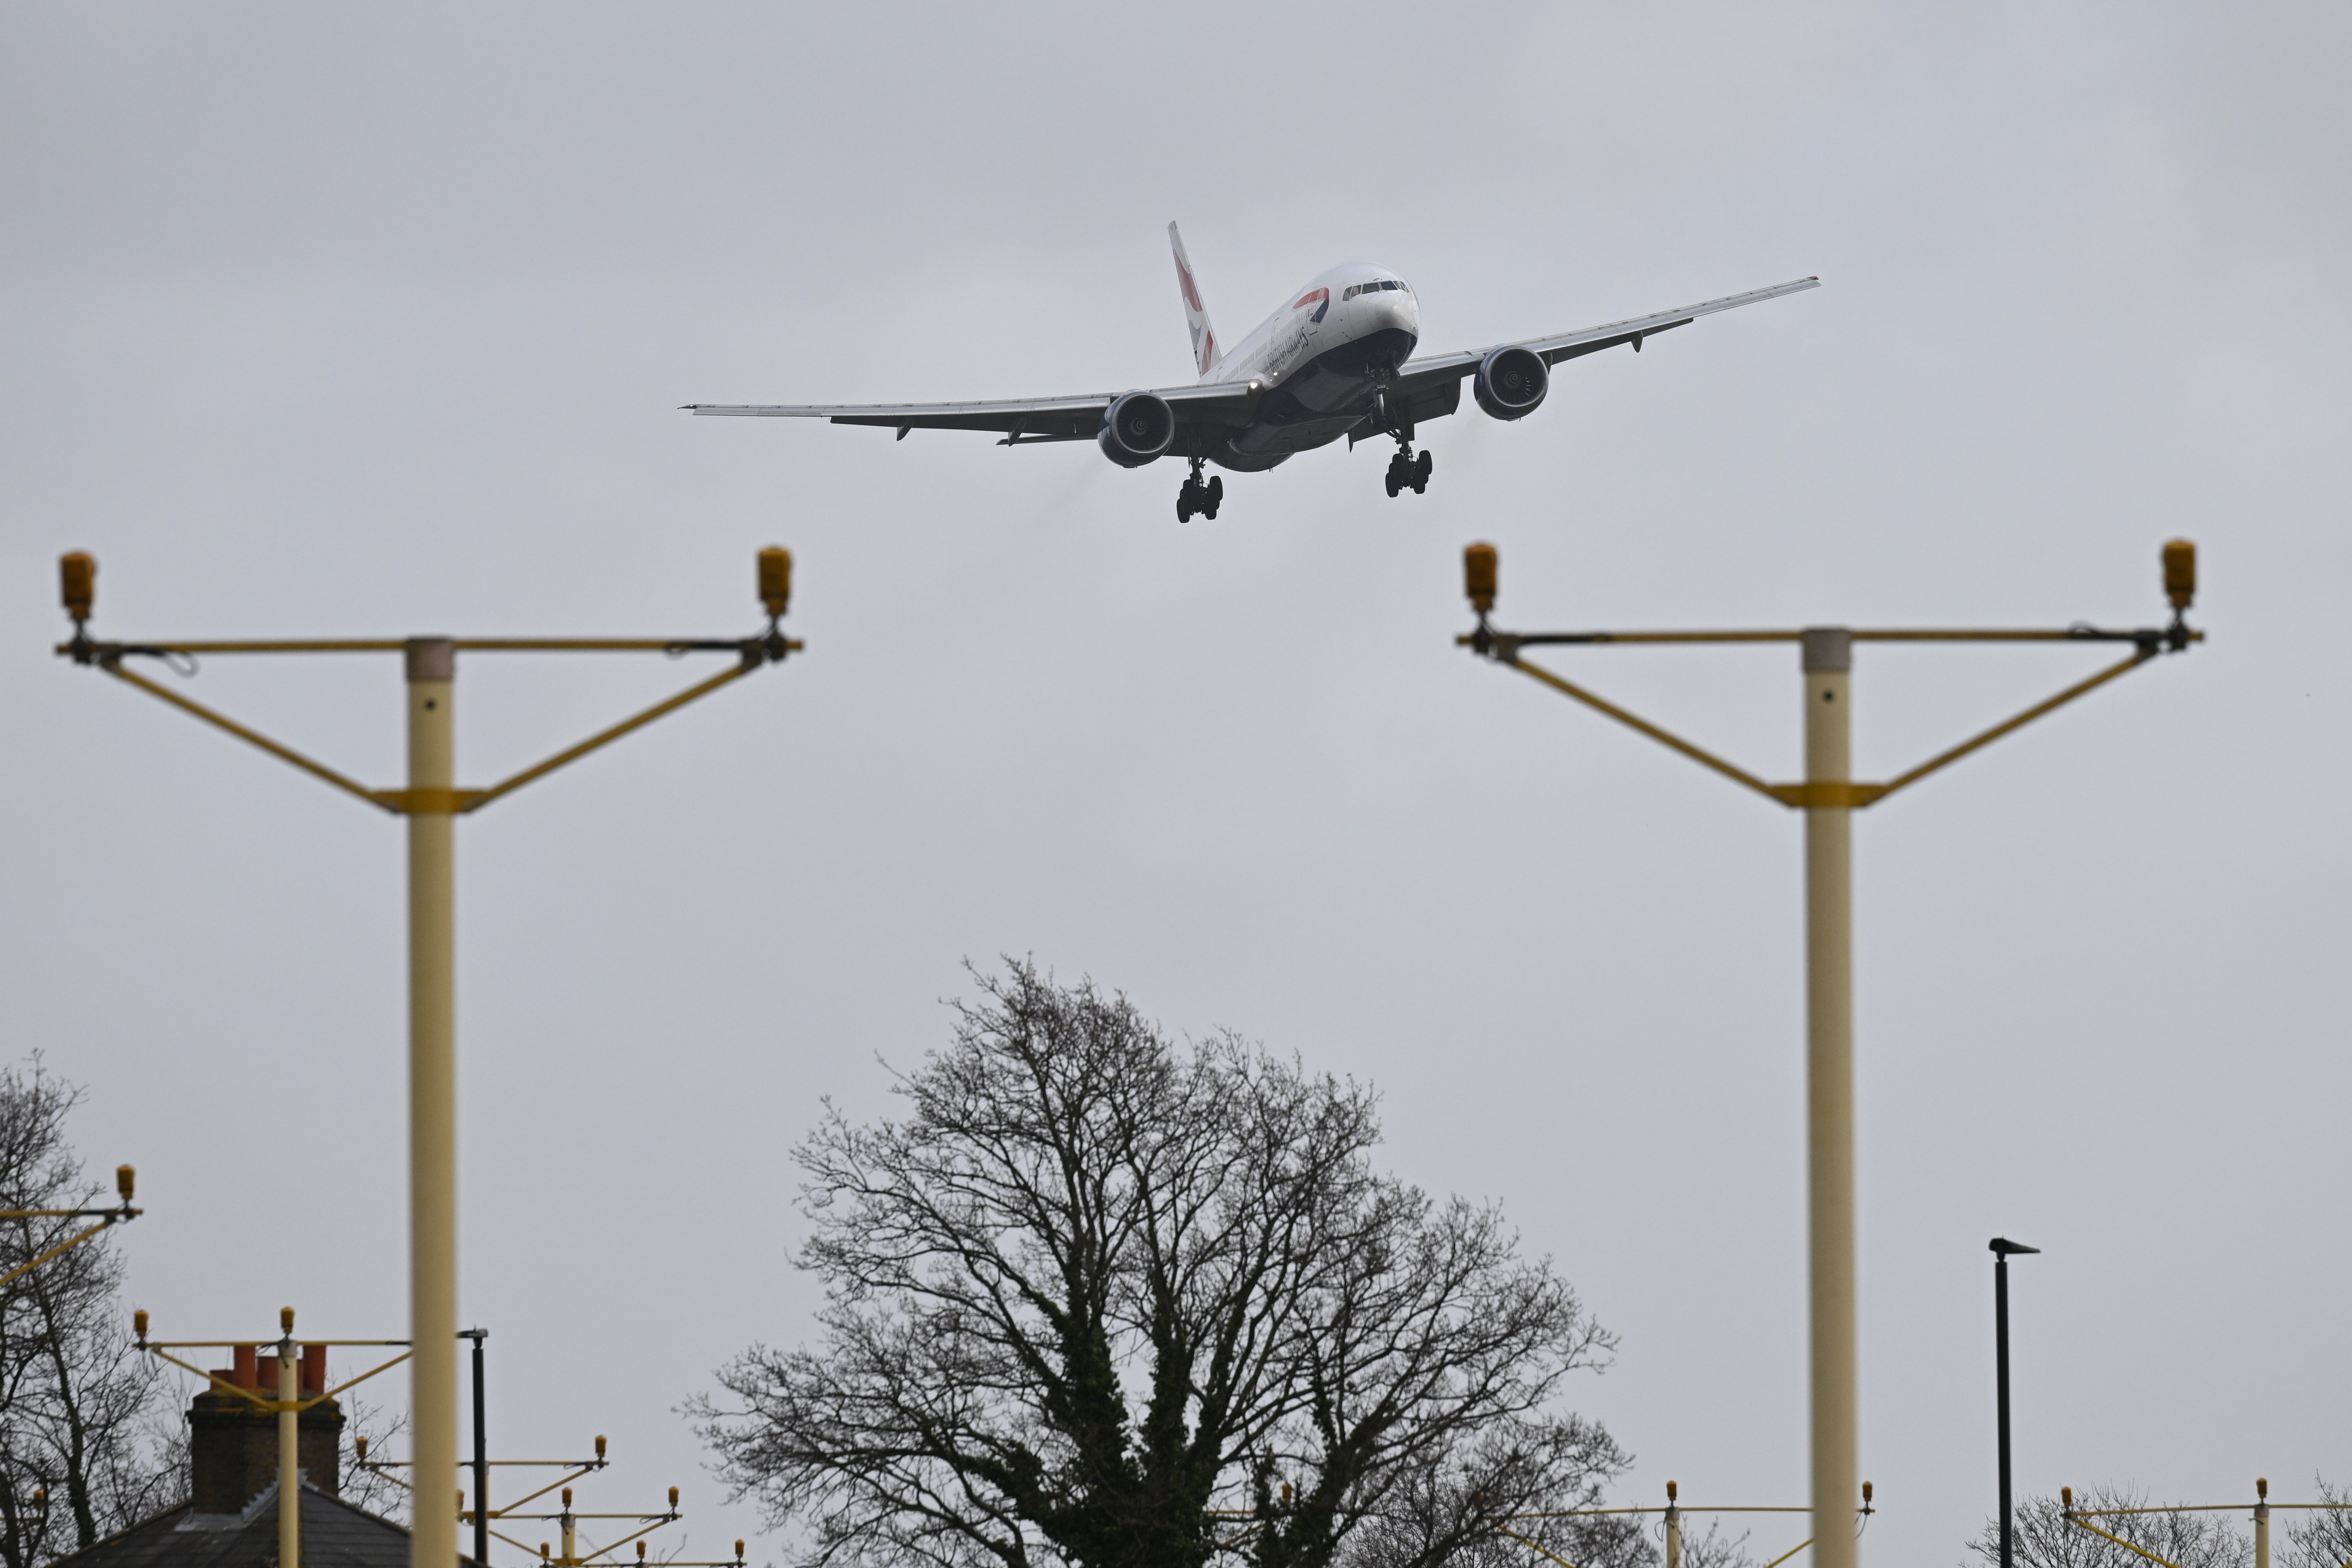 The passenger plane on its way to Manchester Airport struggled with high winds on approach before being diverted to Glasgow